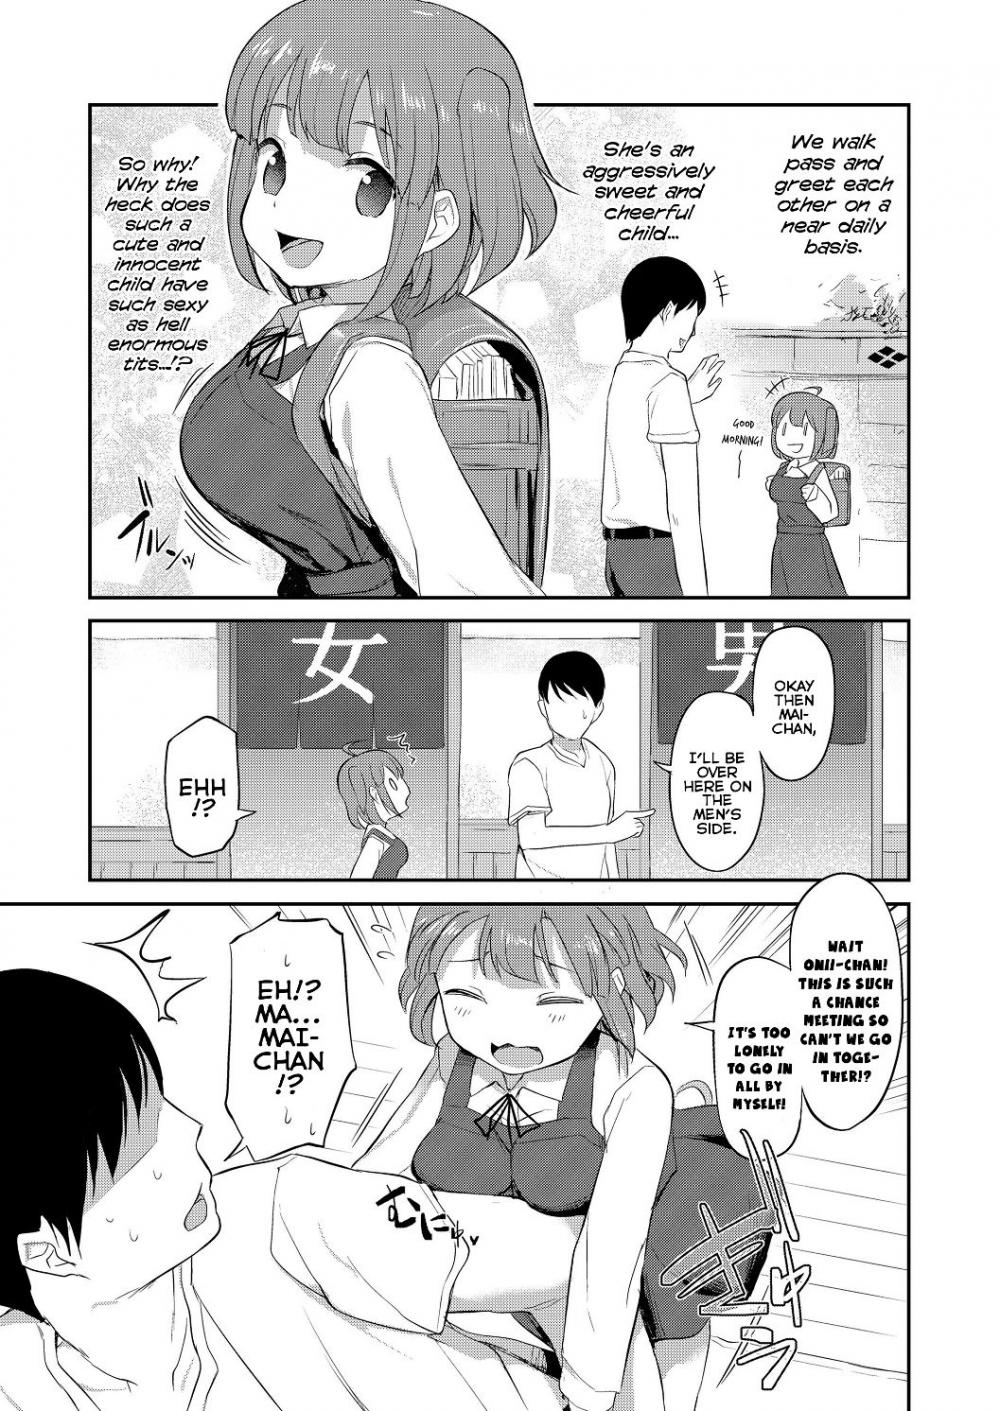 Hentai Manga Comic-What Kind of Weirdo Onii-chan Gets Excited From Seeing His Little Sister Naked?-Chapter 2-3